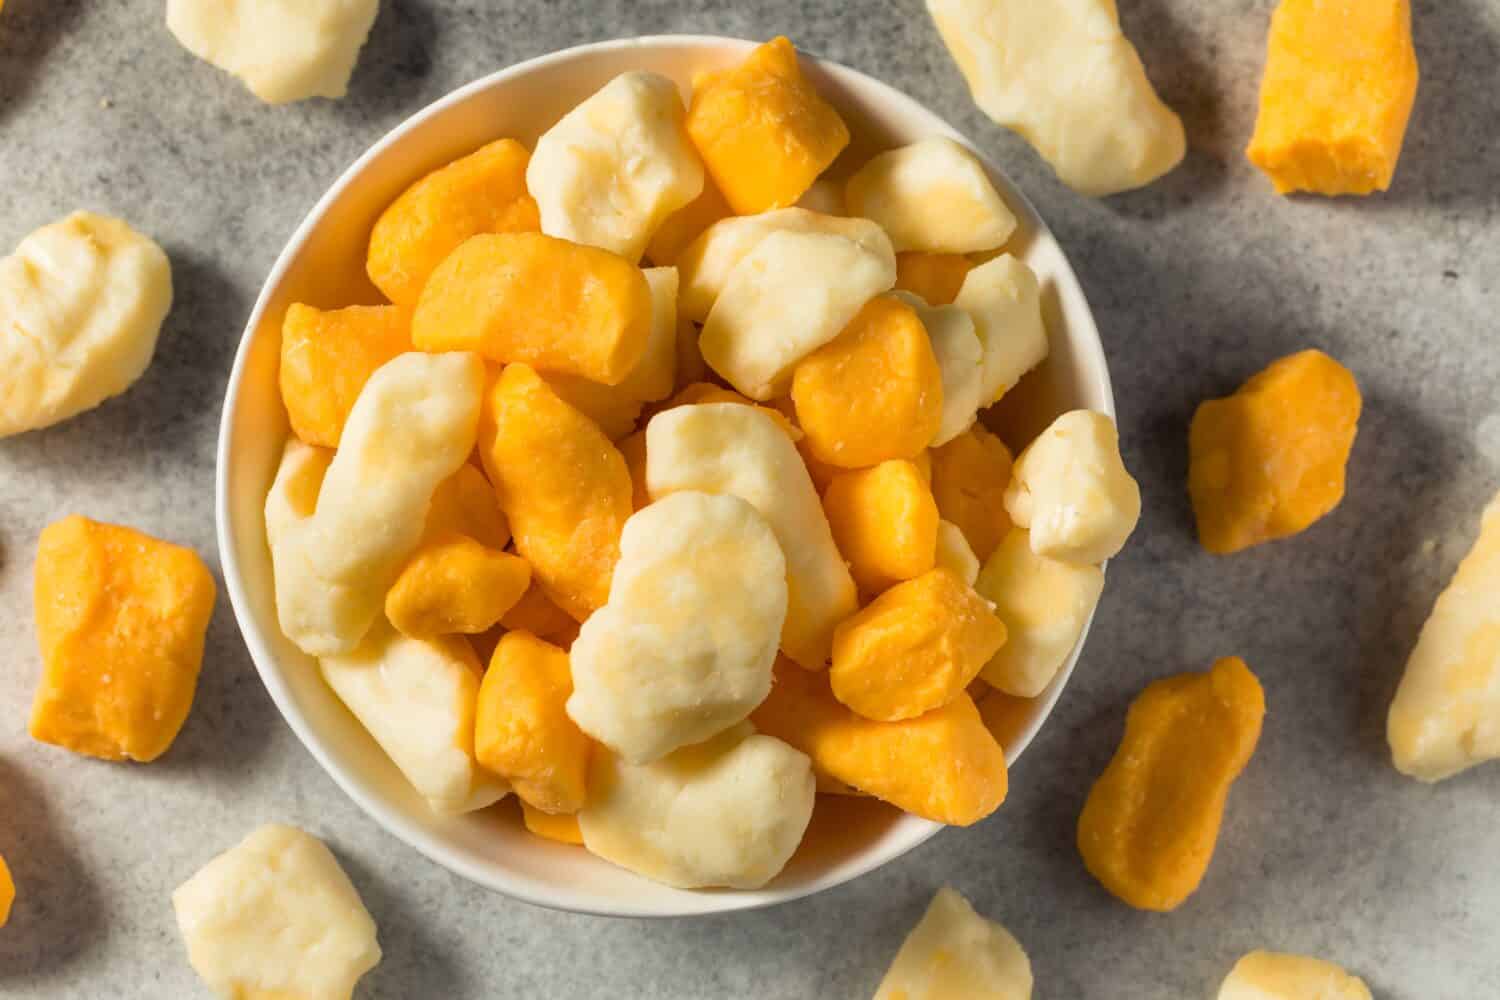 Raw Organic Yellow and White Cheese Curds in a Bowl